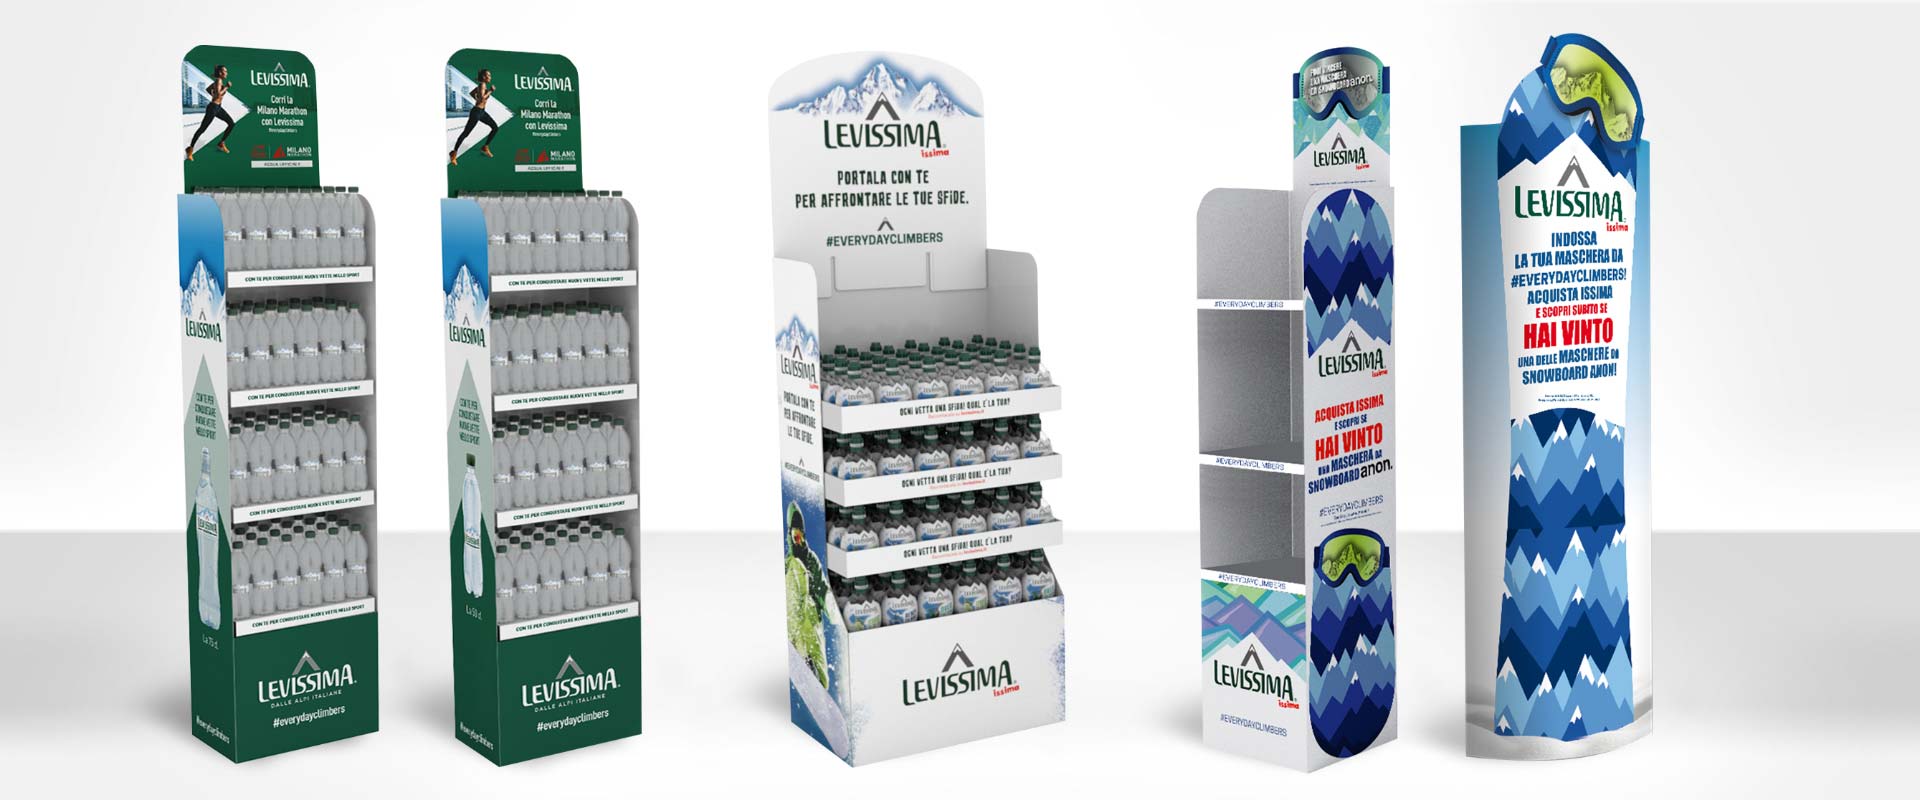 Levissima standing display units for retail